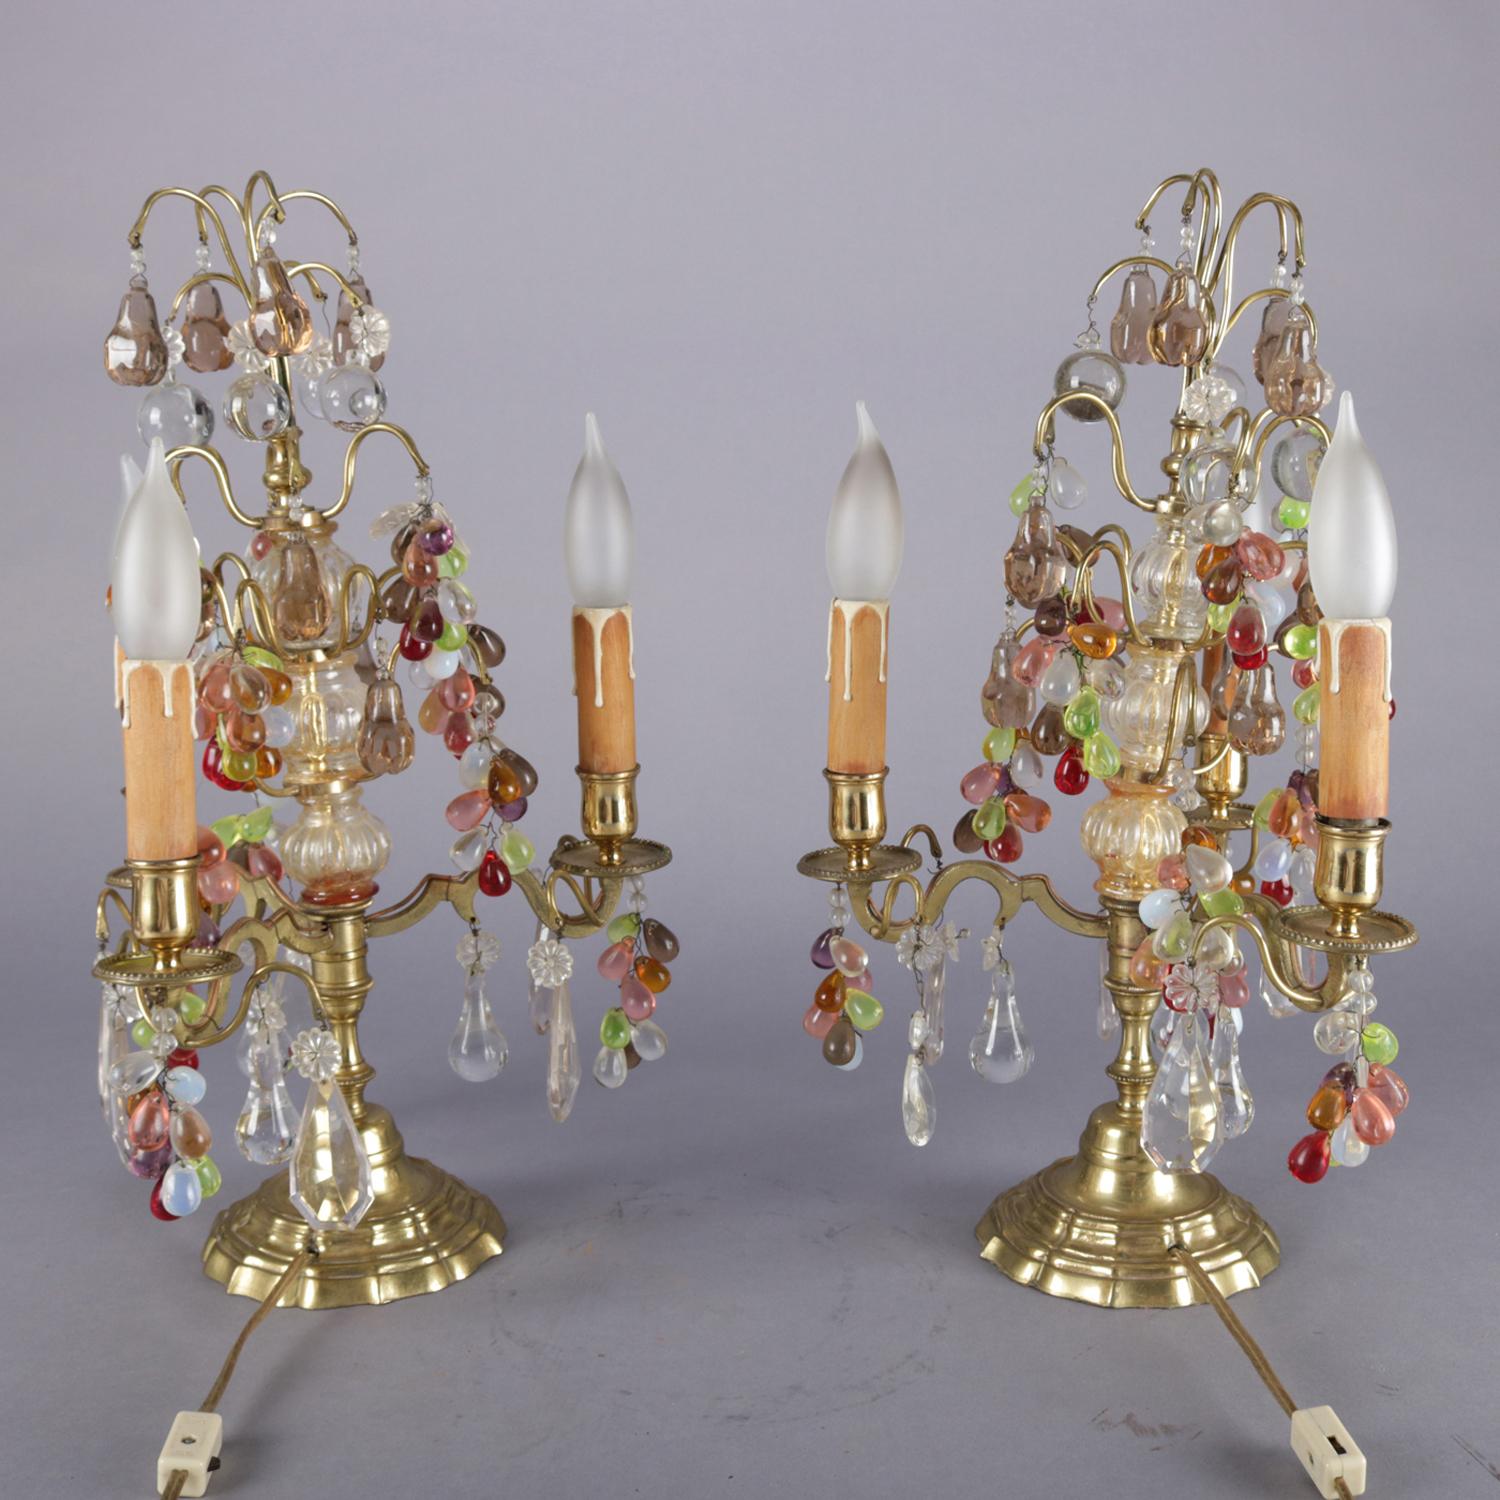 Antique pair of fruit candelabra lamps feature bronze frame with three arms terminating in drip candle lights and having multicolored teardrop prism clusters in grape form, circa 1900.

Measures: 18